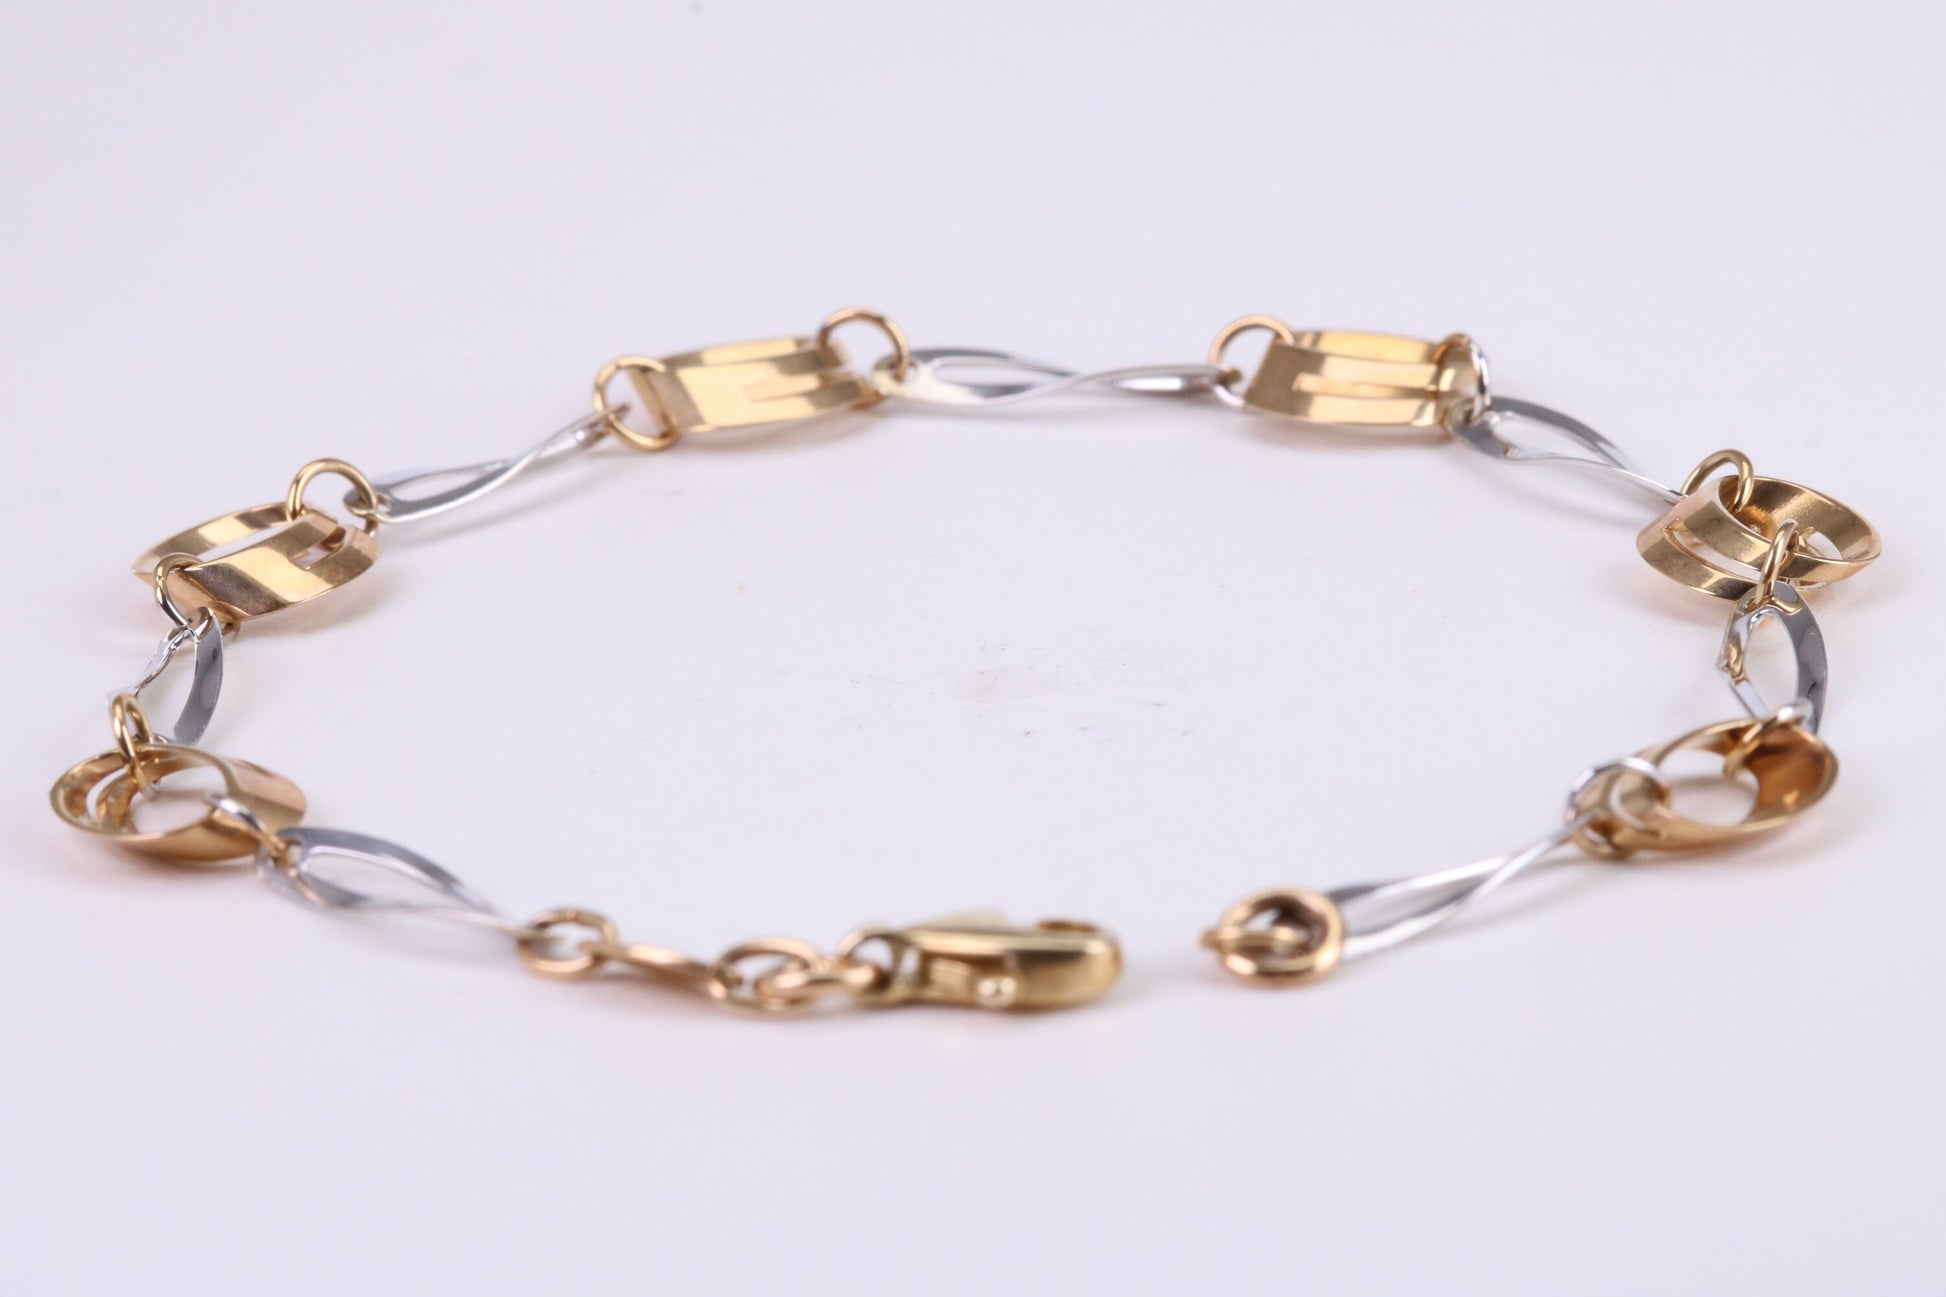 Round and Oval Open Link Bracelet, Made From Solid Yellow Gold, British Hallmarked, Luxury Gift Boxed